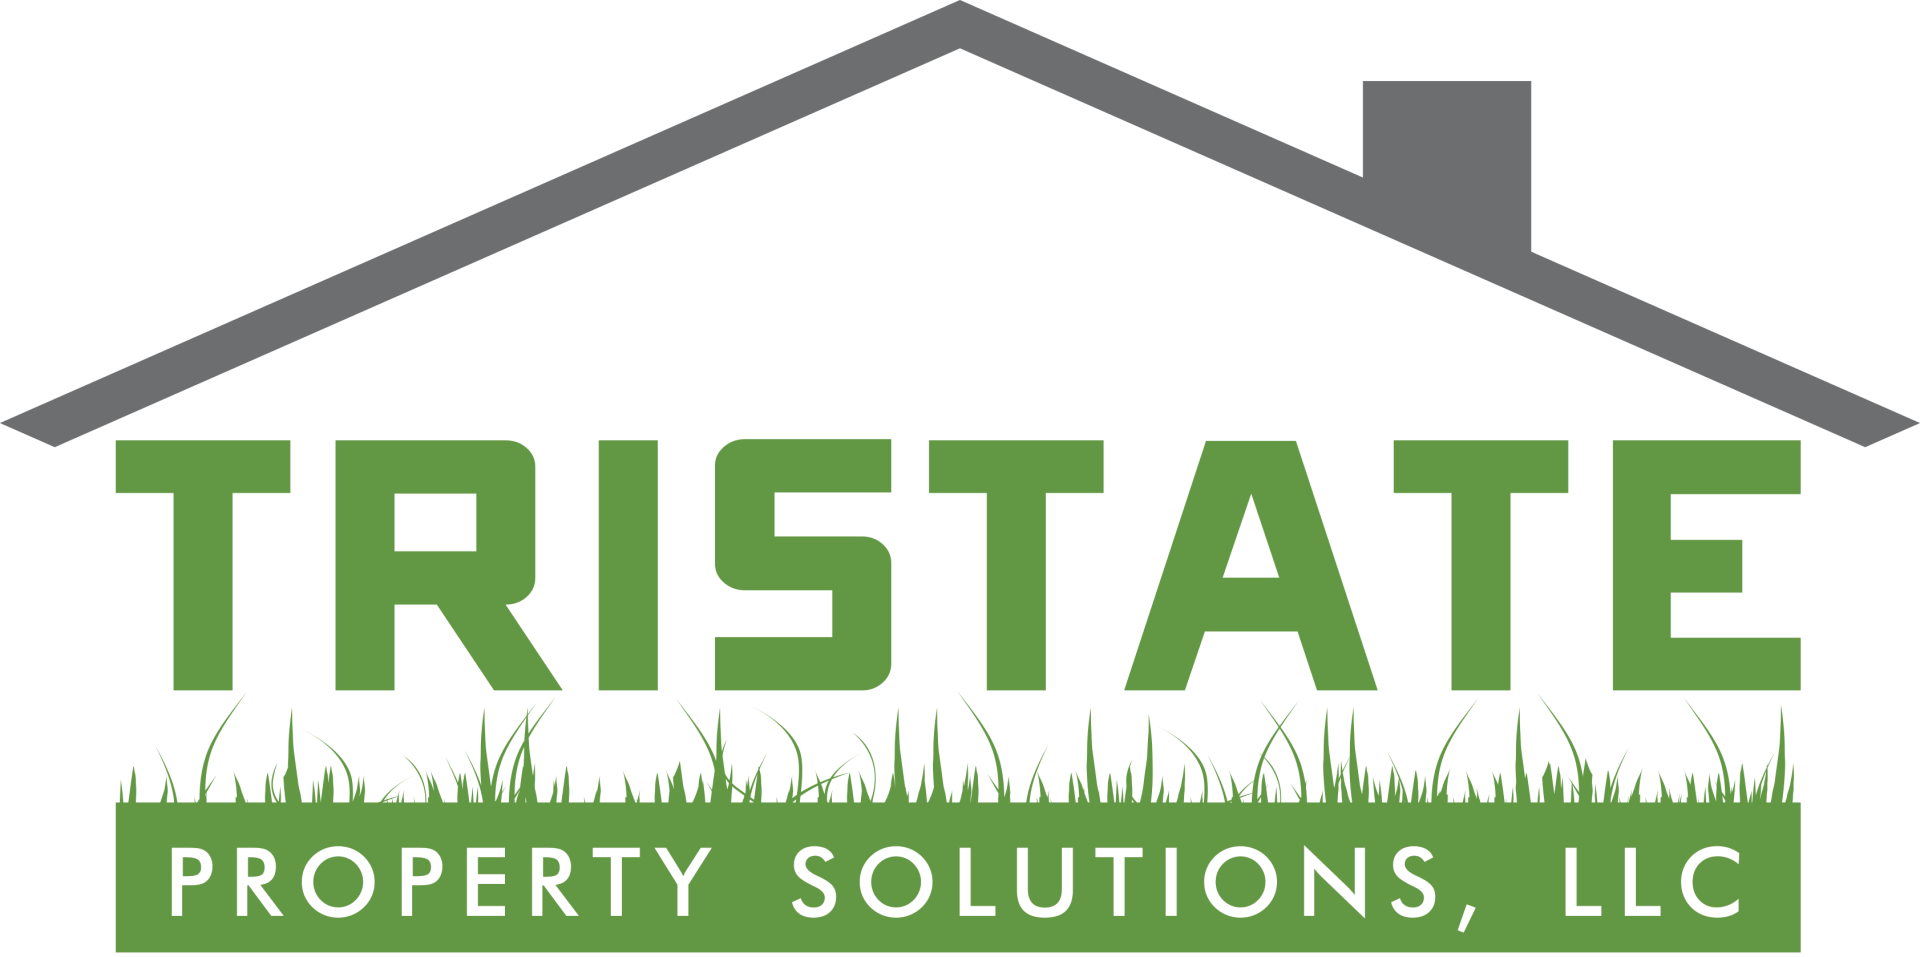 Tristate Property Solutions, LLC